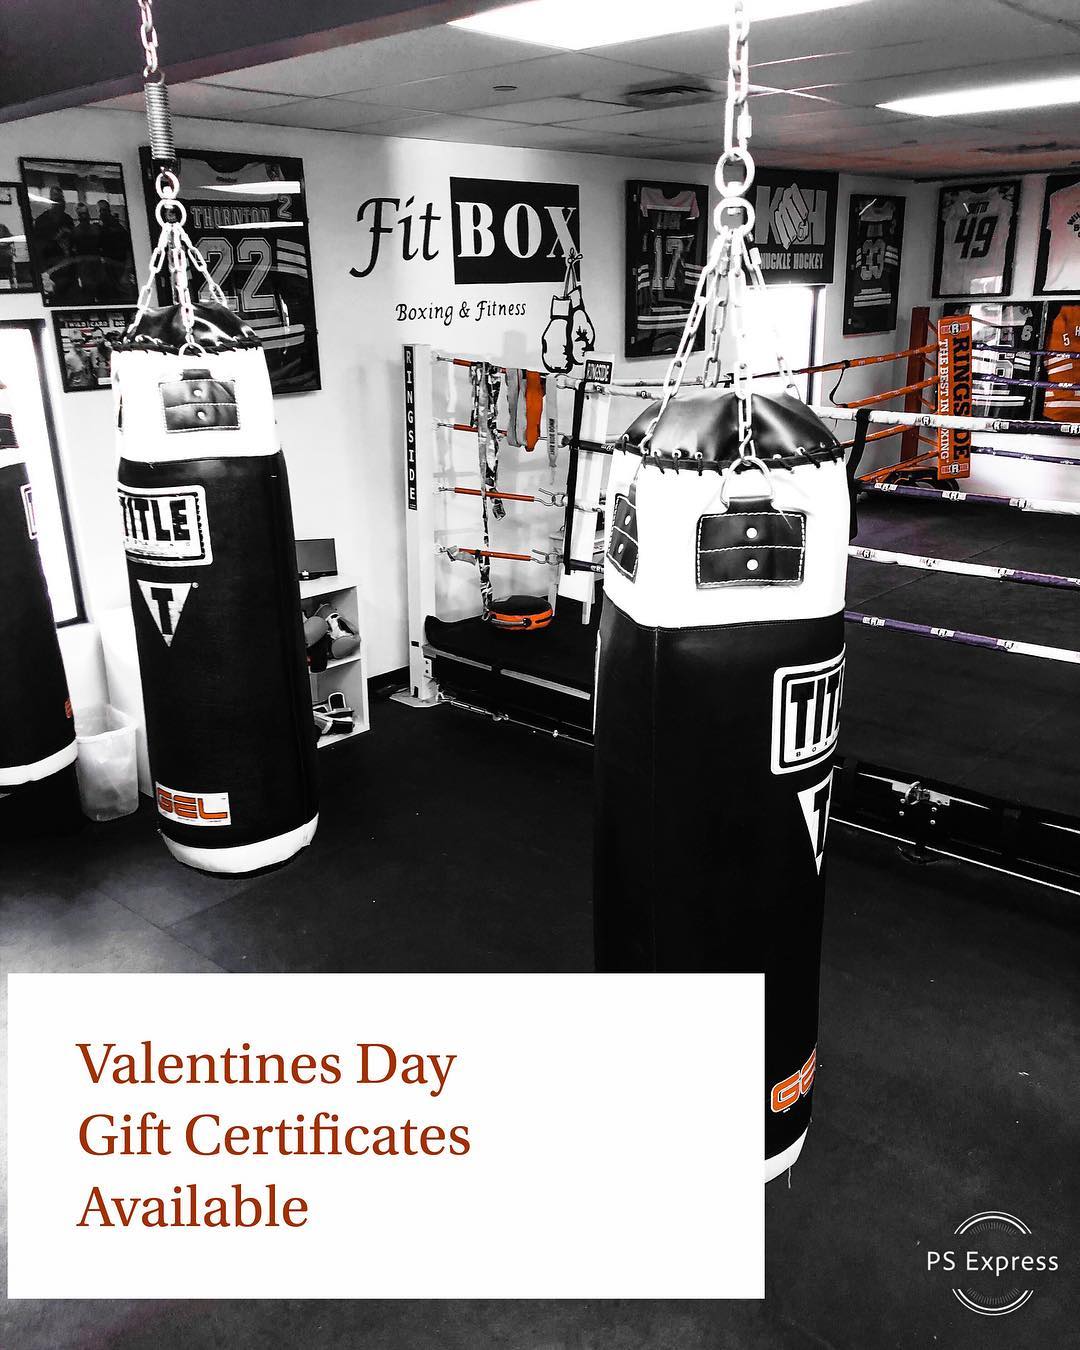 What better gift to give the one you love than a few boxing sessions with @tommymcinerney for Valentines Day – He/She will get to punch things – He/She will relieve stress – He/She will get a great workout Contact us Today to purchase a gift certificate at (781)727-9503 or email Fitbox@outlook.com – #boxing #fitness #valentines #valentinesday #🥊 #️ #workout #boxingtraining #boxingtrainer #exercise #love #feelgood #gift #giftideas #Boston #Dedham #legacyplace #shopping